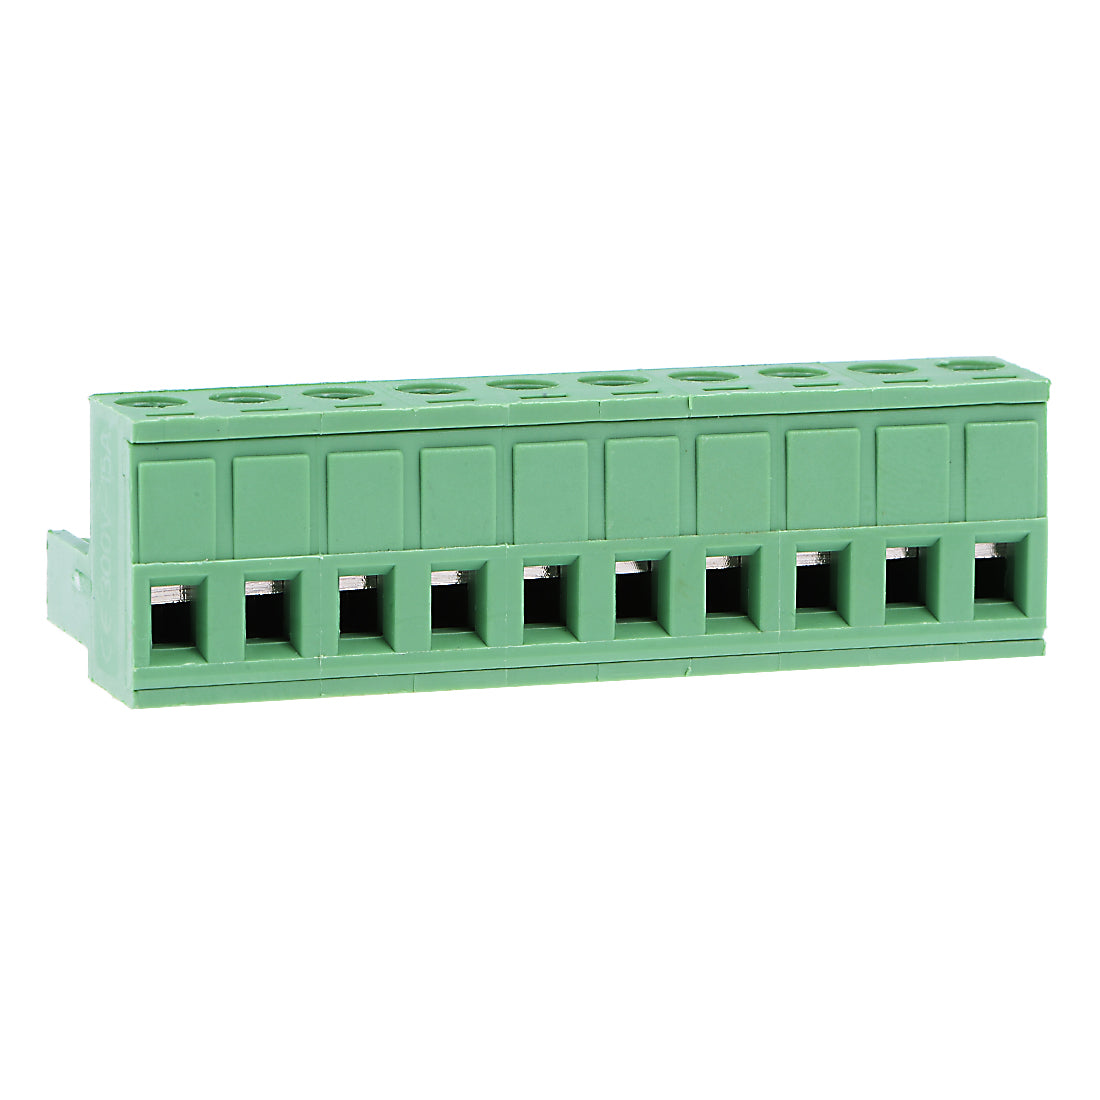 uxcell Uxcell 4Pcs AC 300V 15A 5.08mm Pitch 10P Flat Angle Needle Seat Plug-In PCB Terminal Block Connector Green